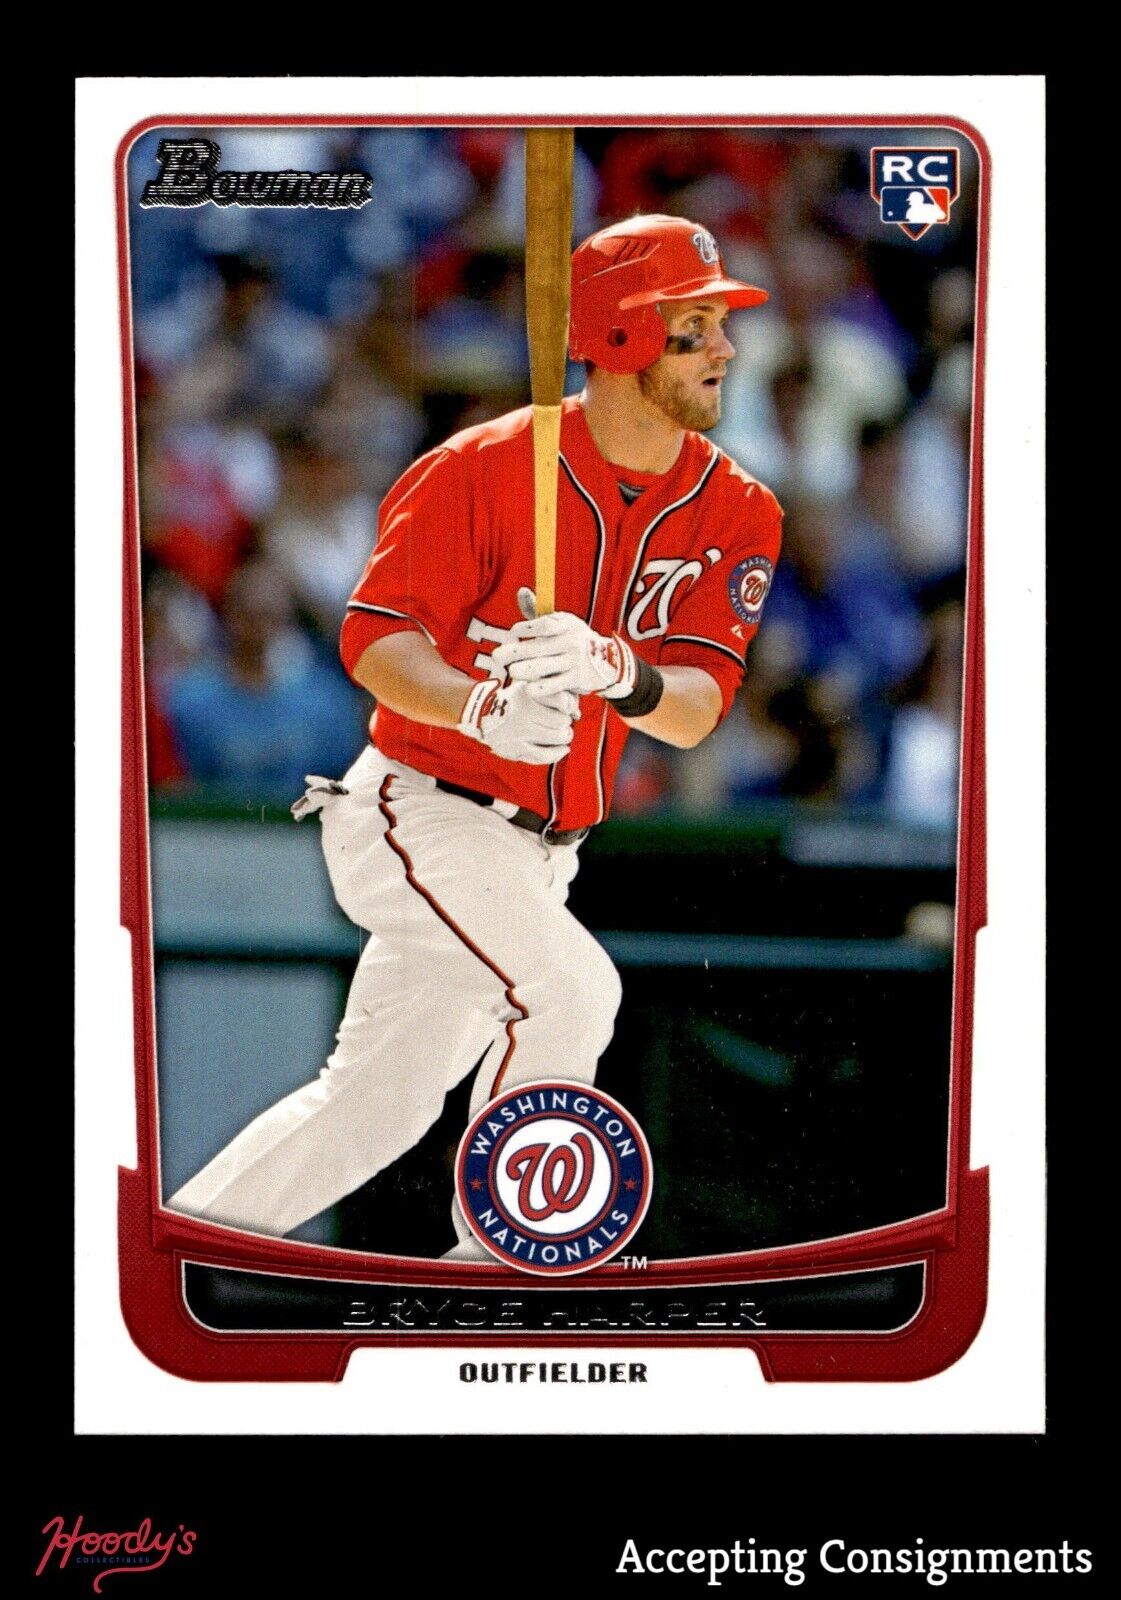 2012 Bowman Draft #10 Bryce Harper NATIONALS RC ROOKIE